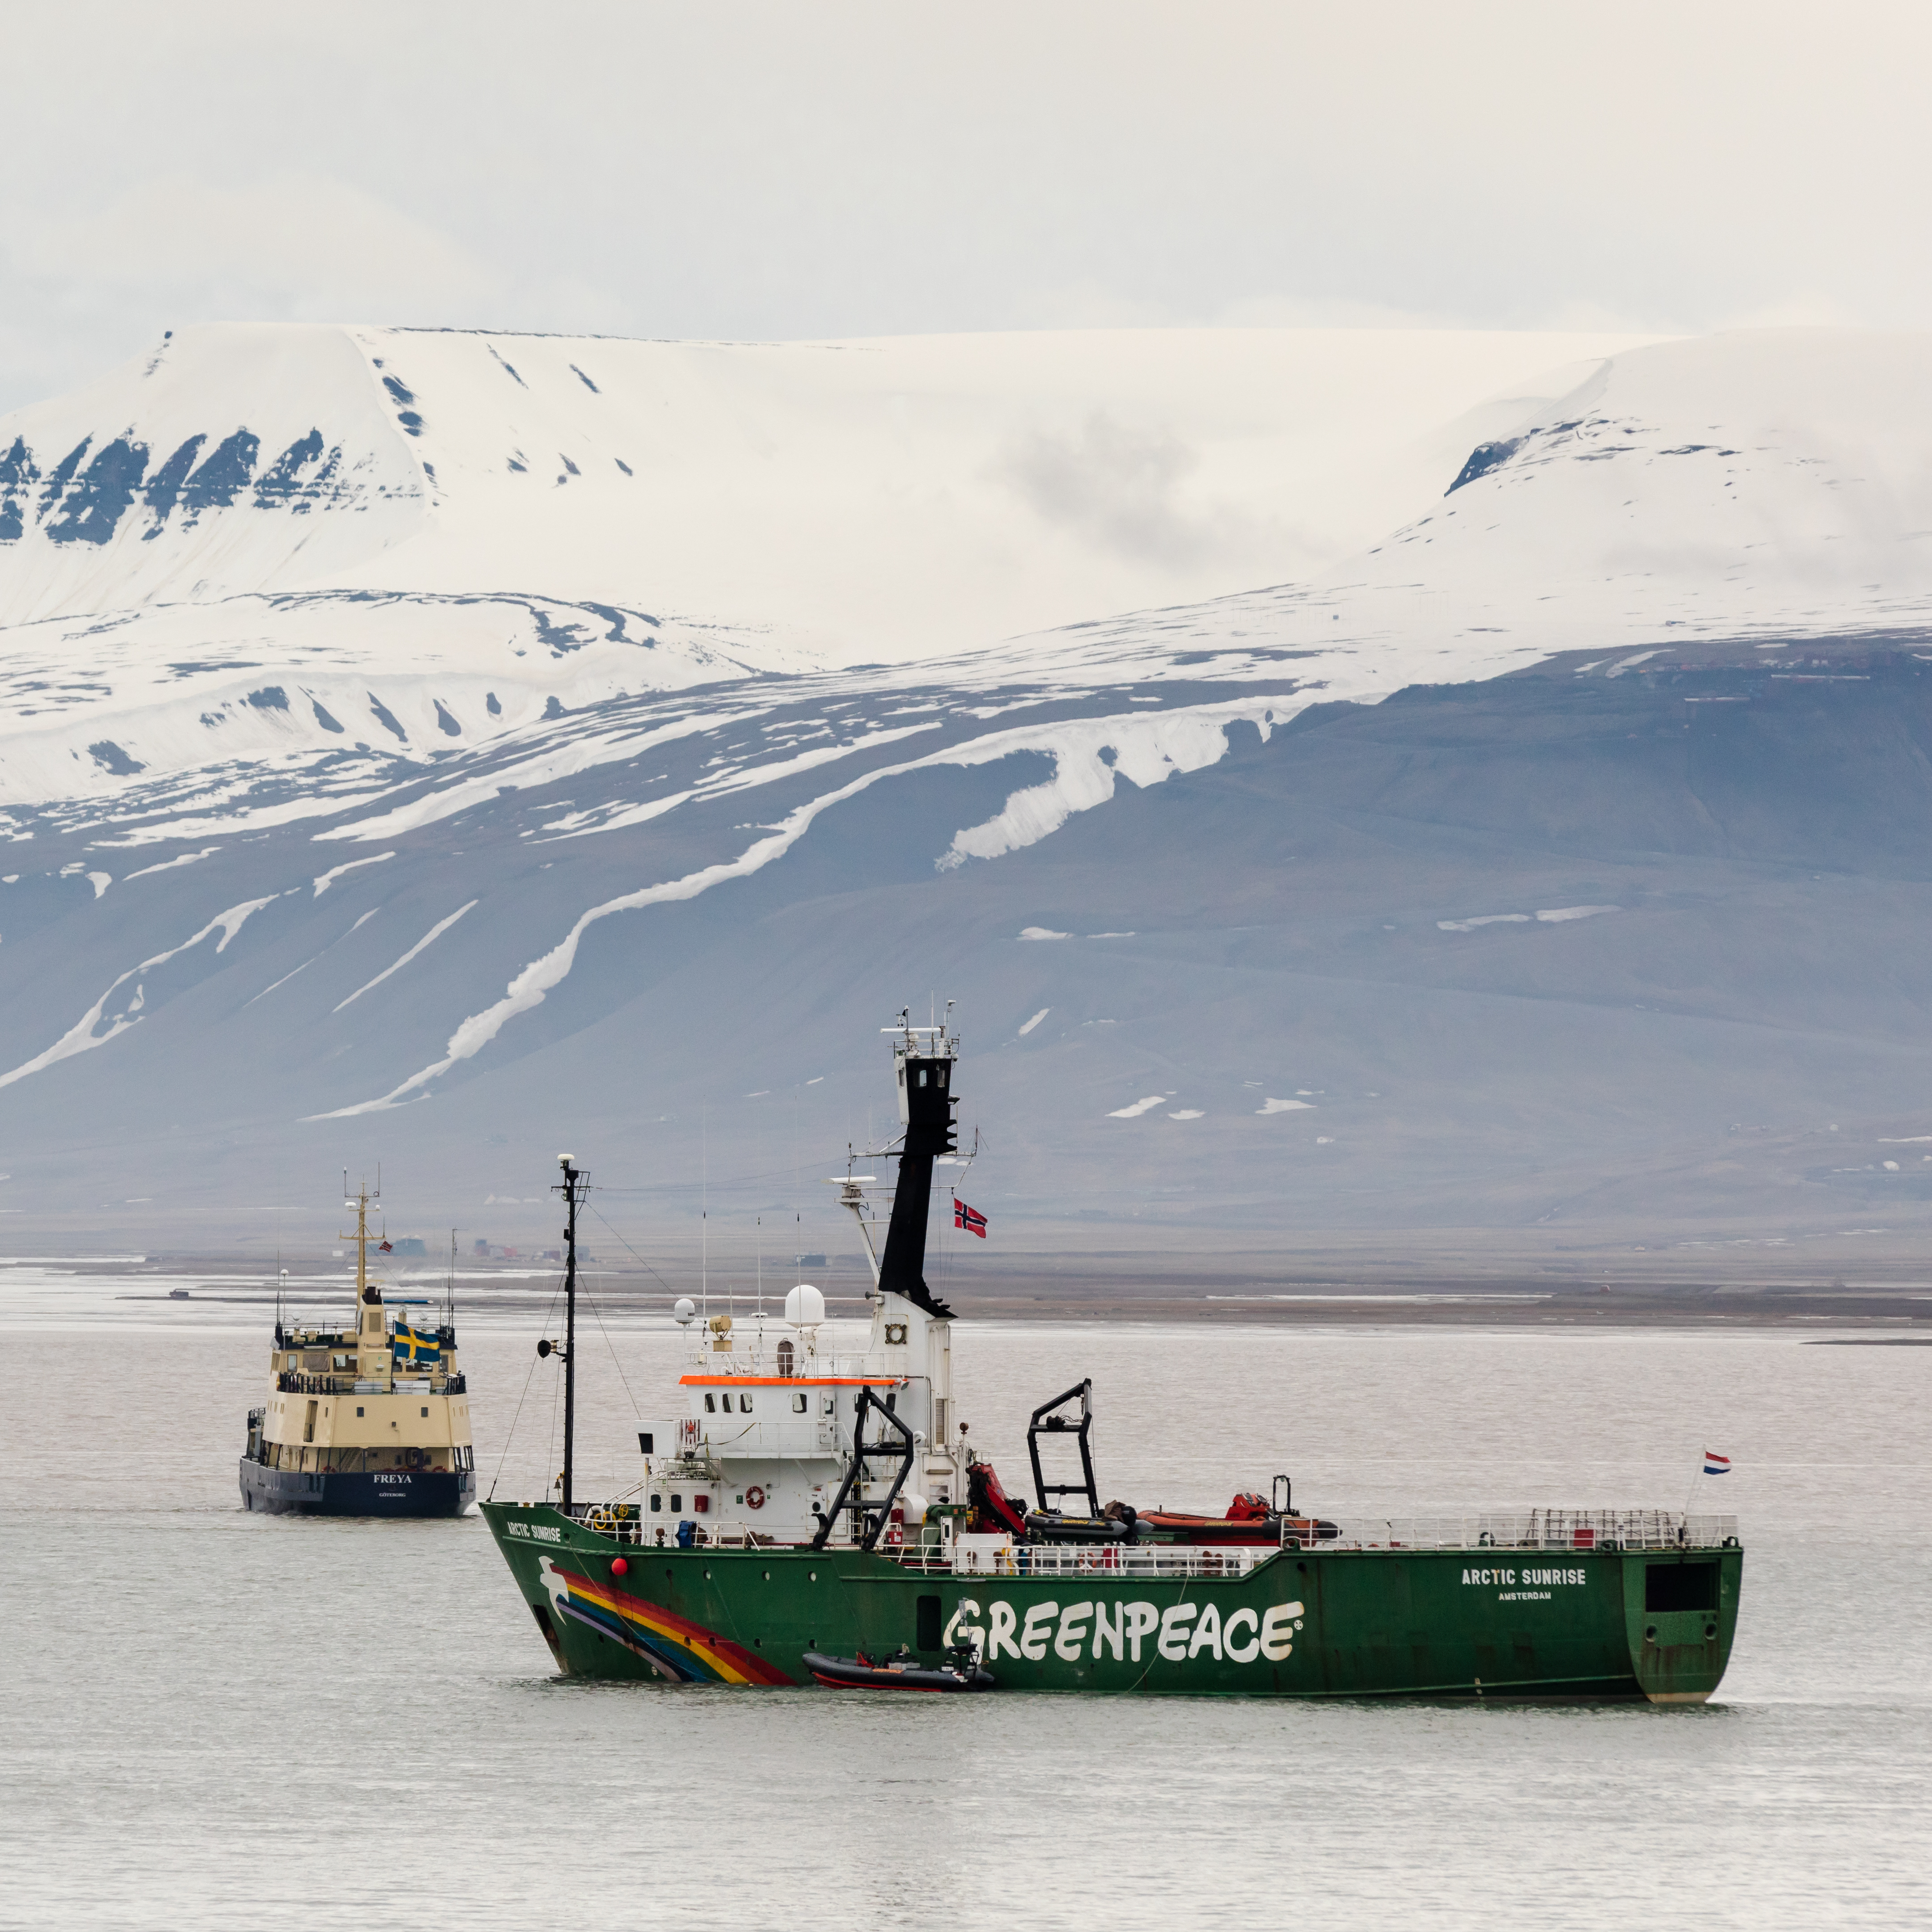 The Greenpeace Arctic Sunrise anchored in the Advent fjord (Advenffjorden) near the town of Longyearbyen in Spitsbergen in the Svalbard Archipelago in 2016. (Getty)